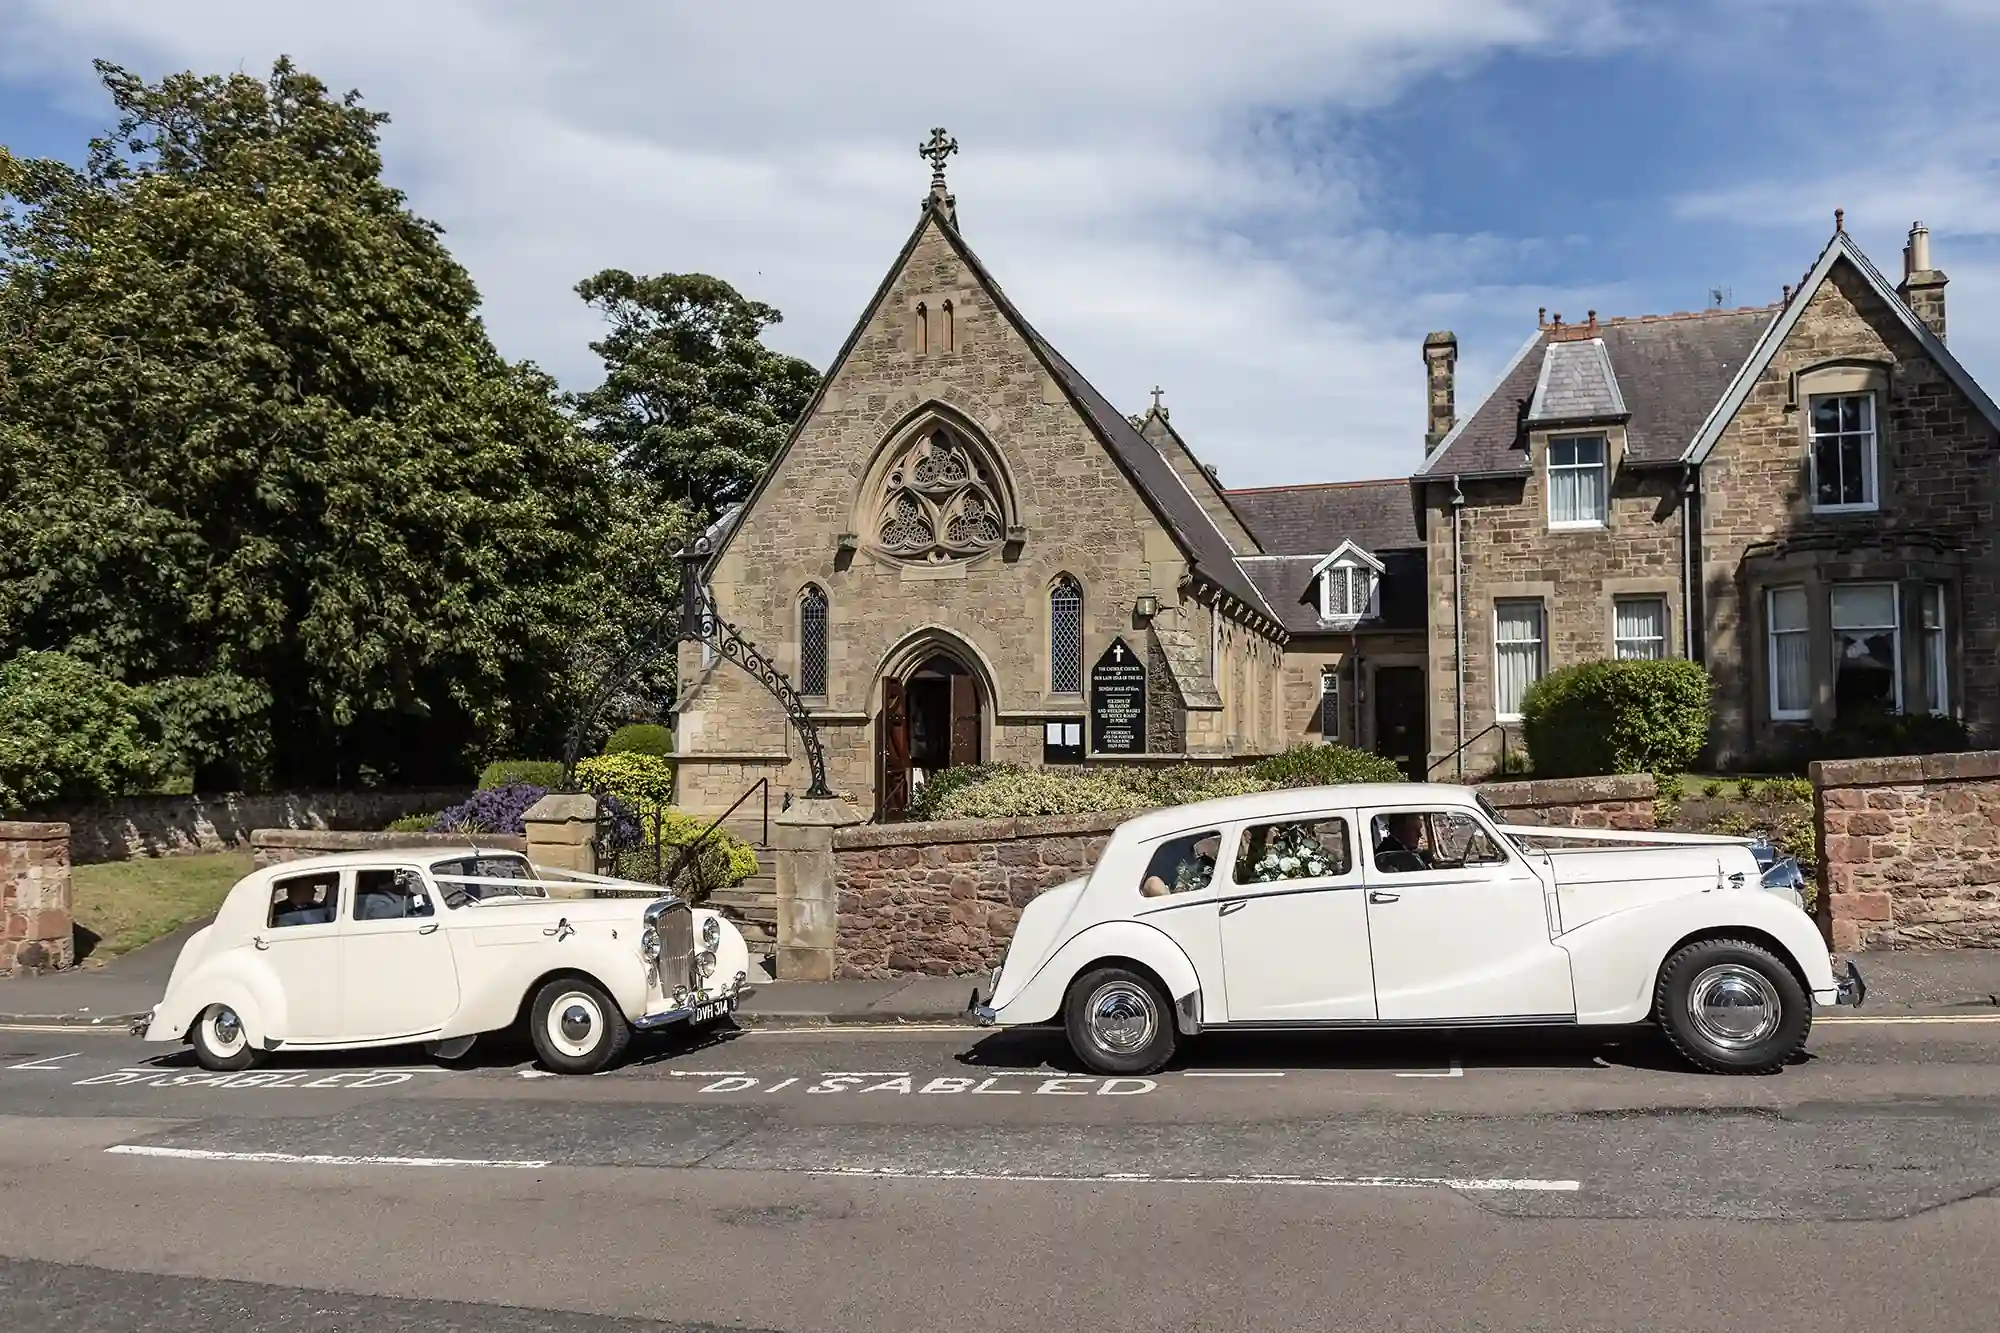 Two vintage white cars parked outside a quaint stone church with a sign marked "disabled" on the road, under a clear blue sky.